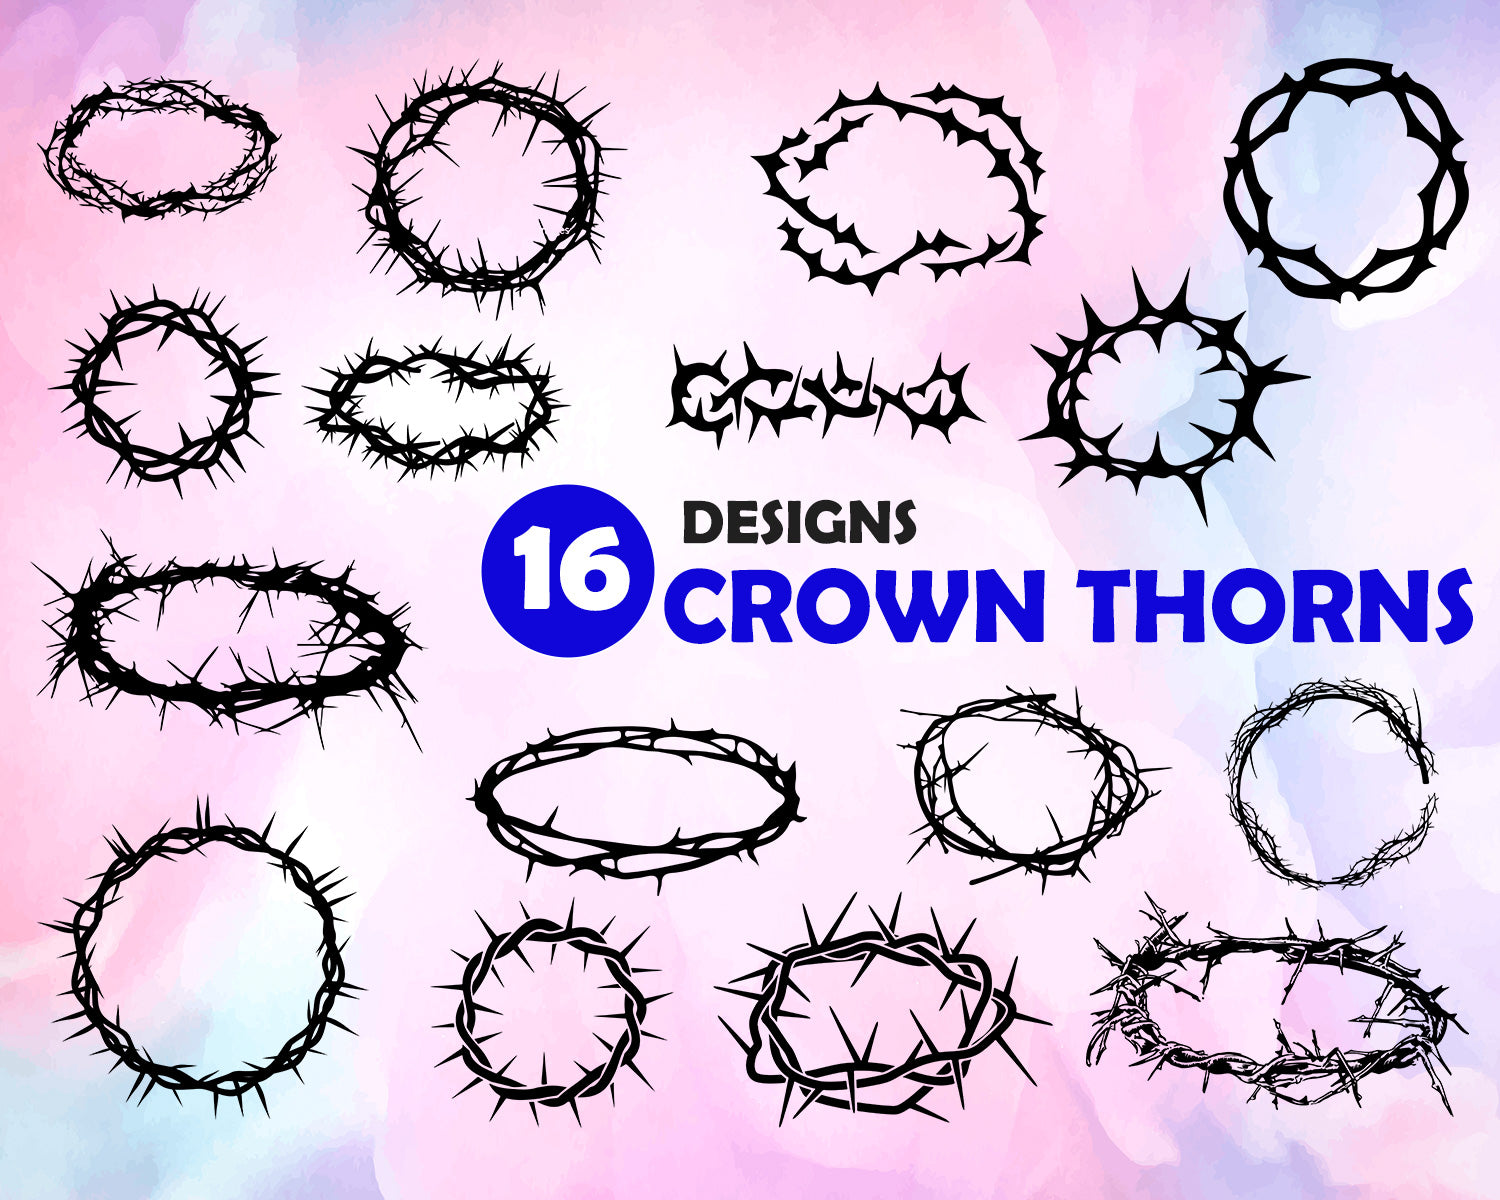 Download Crown Thorns Svg Crown Thorns Svg Clipart Crown Svg Thorns Silhouette Clipartic